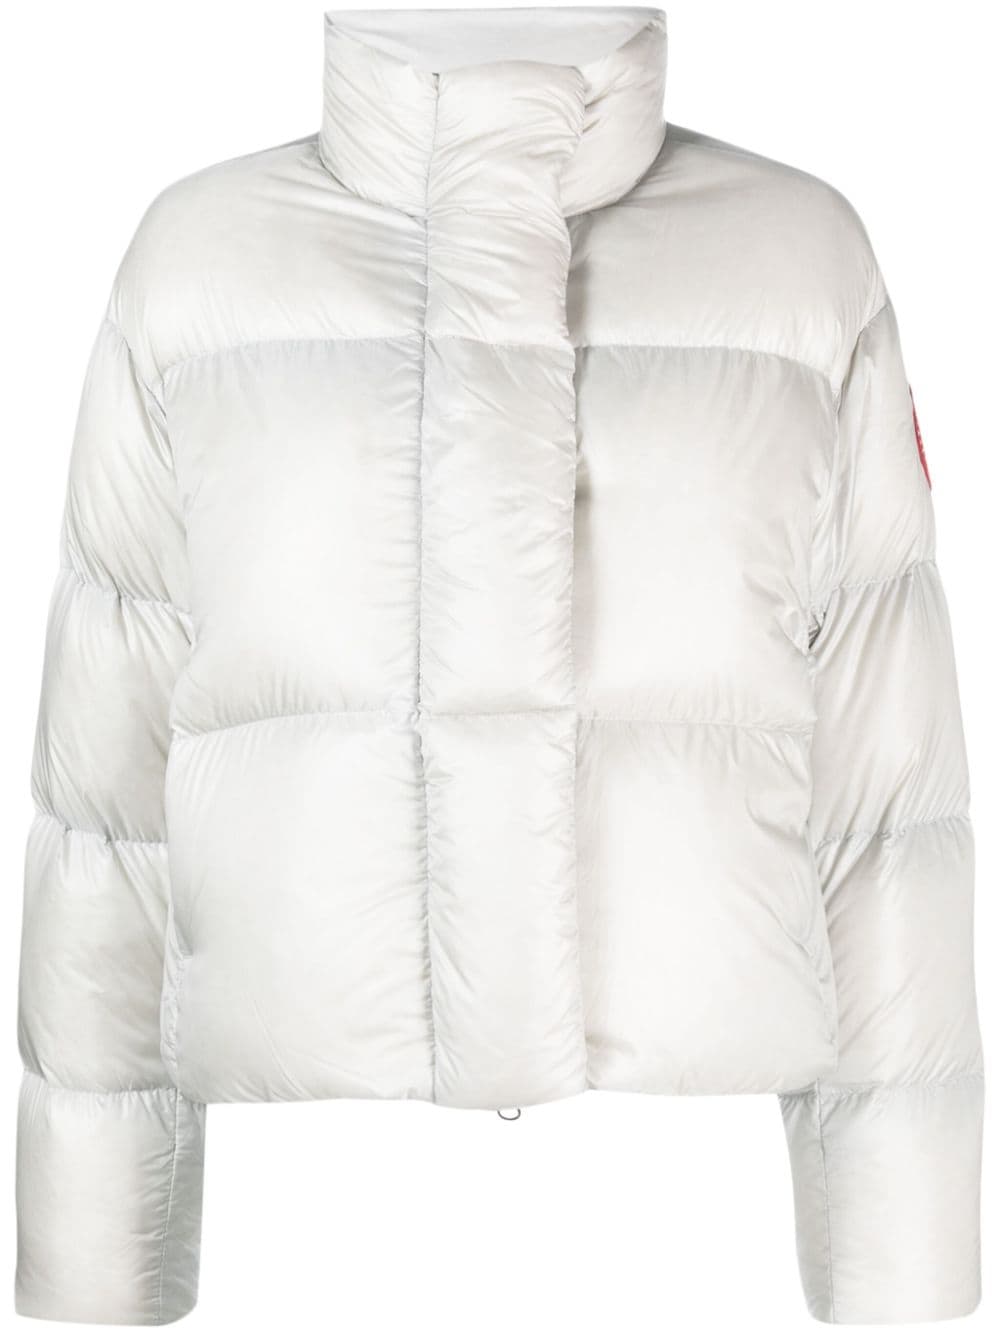 Cypress cropped puffer jacket in blue - Canada Goose